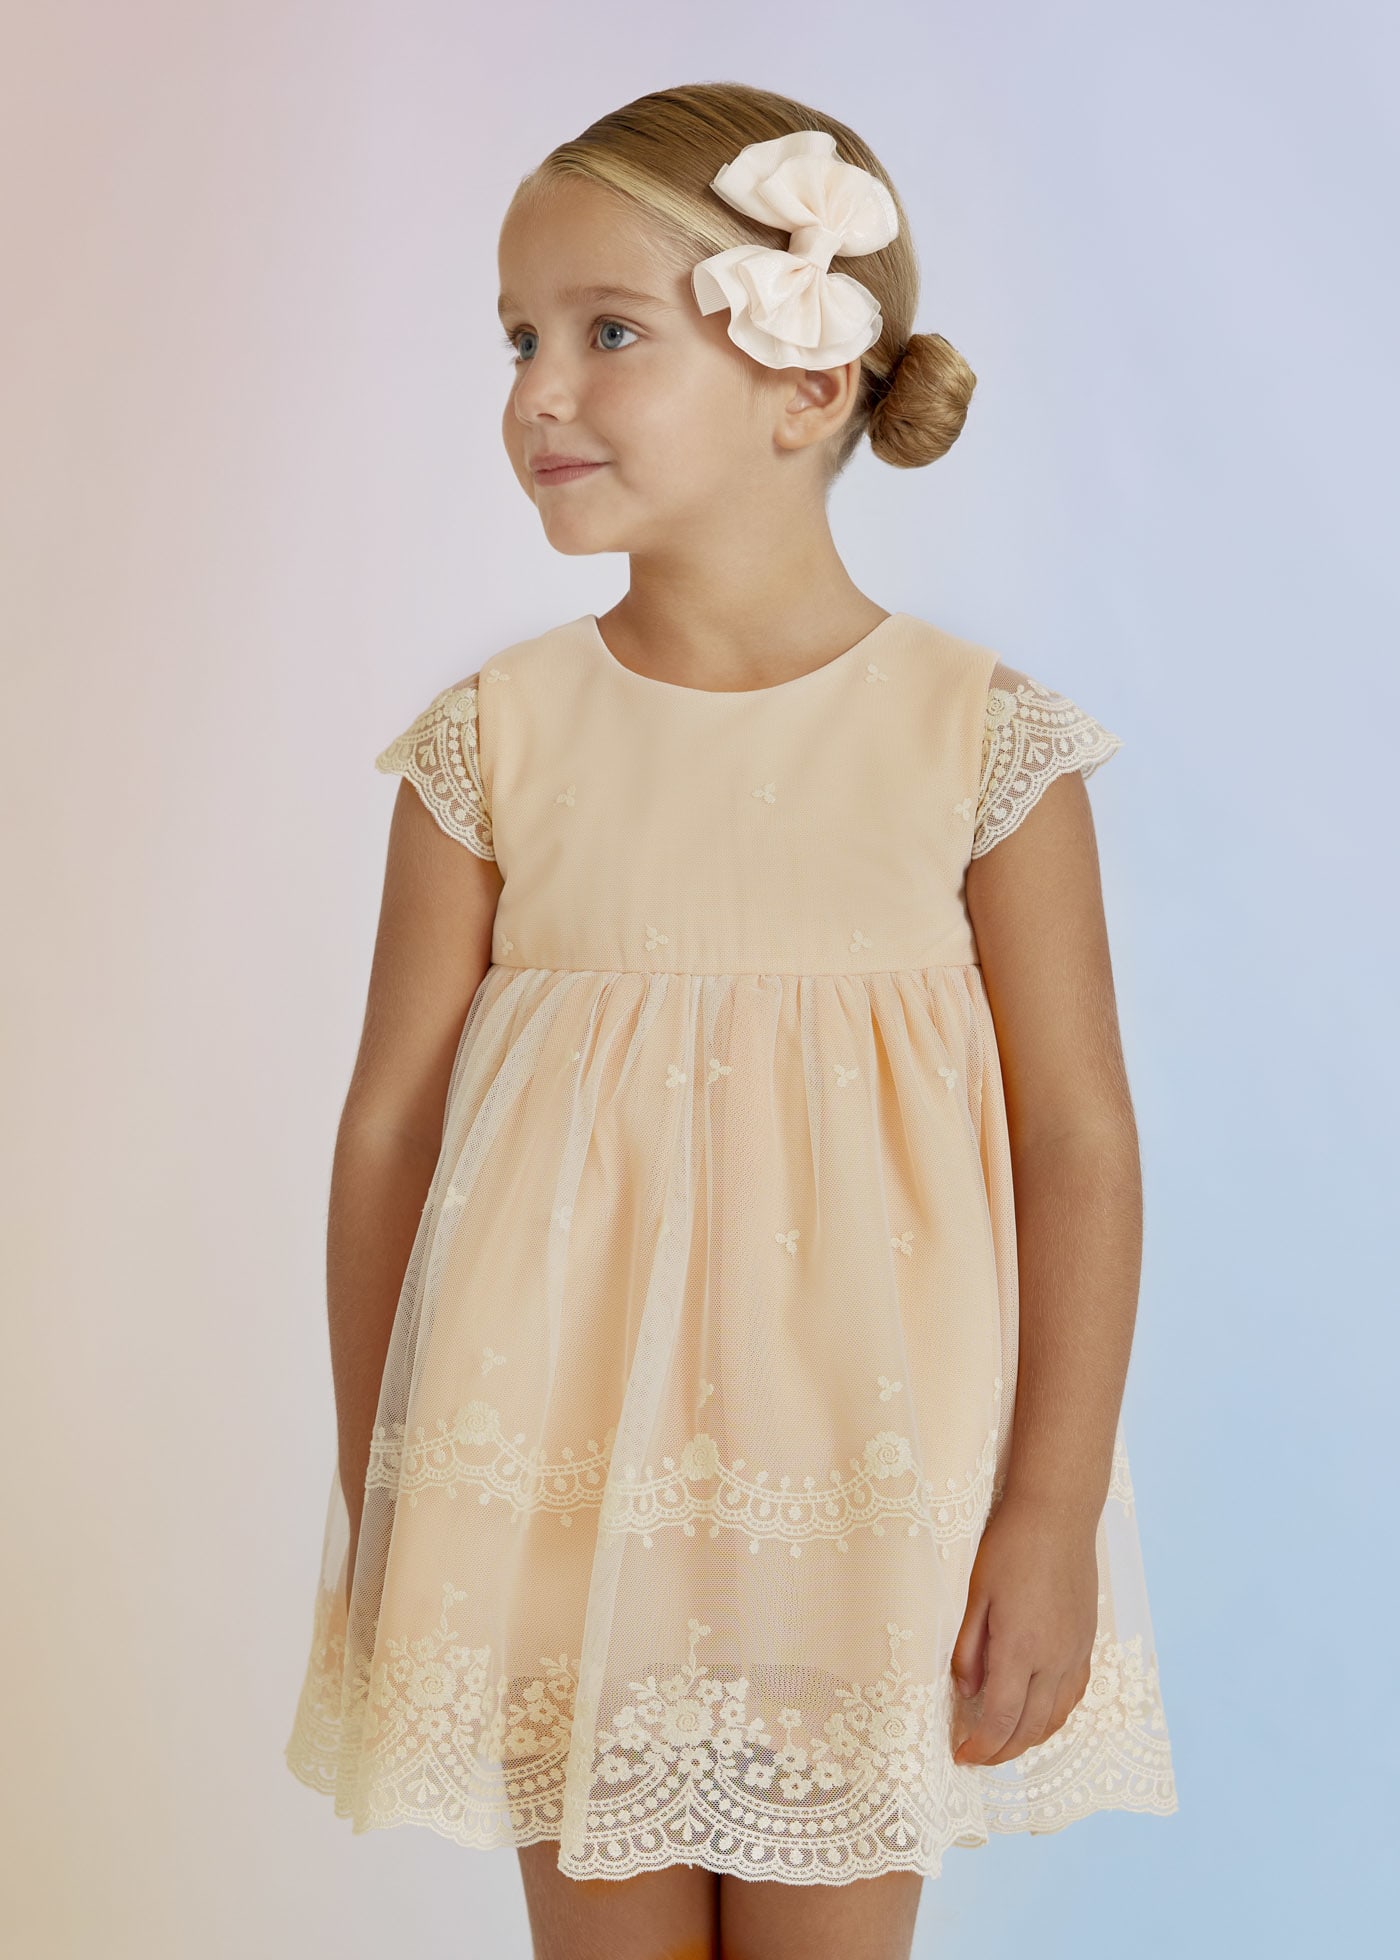 Tulle embroidered dress girl